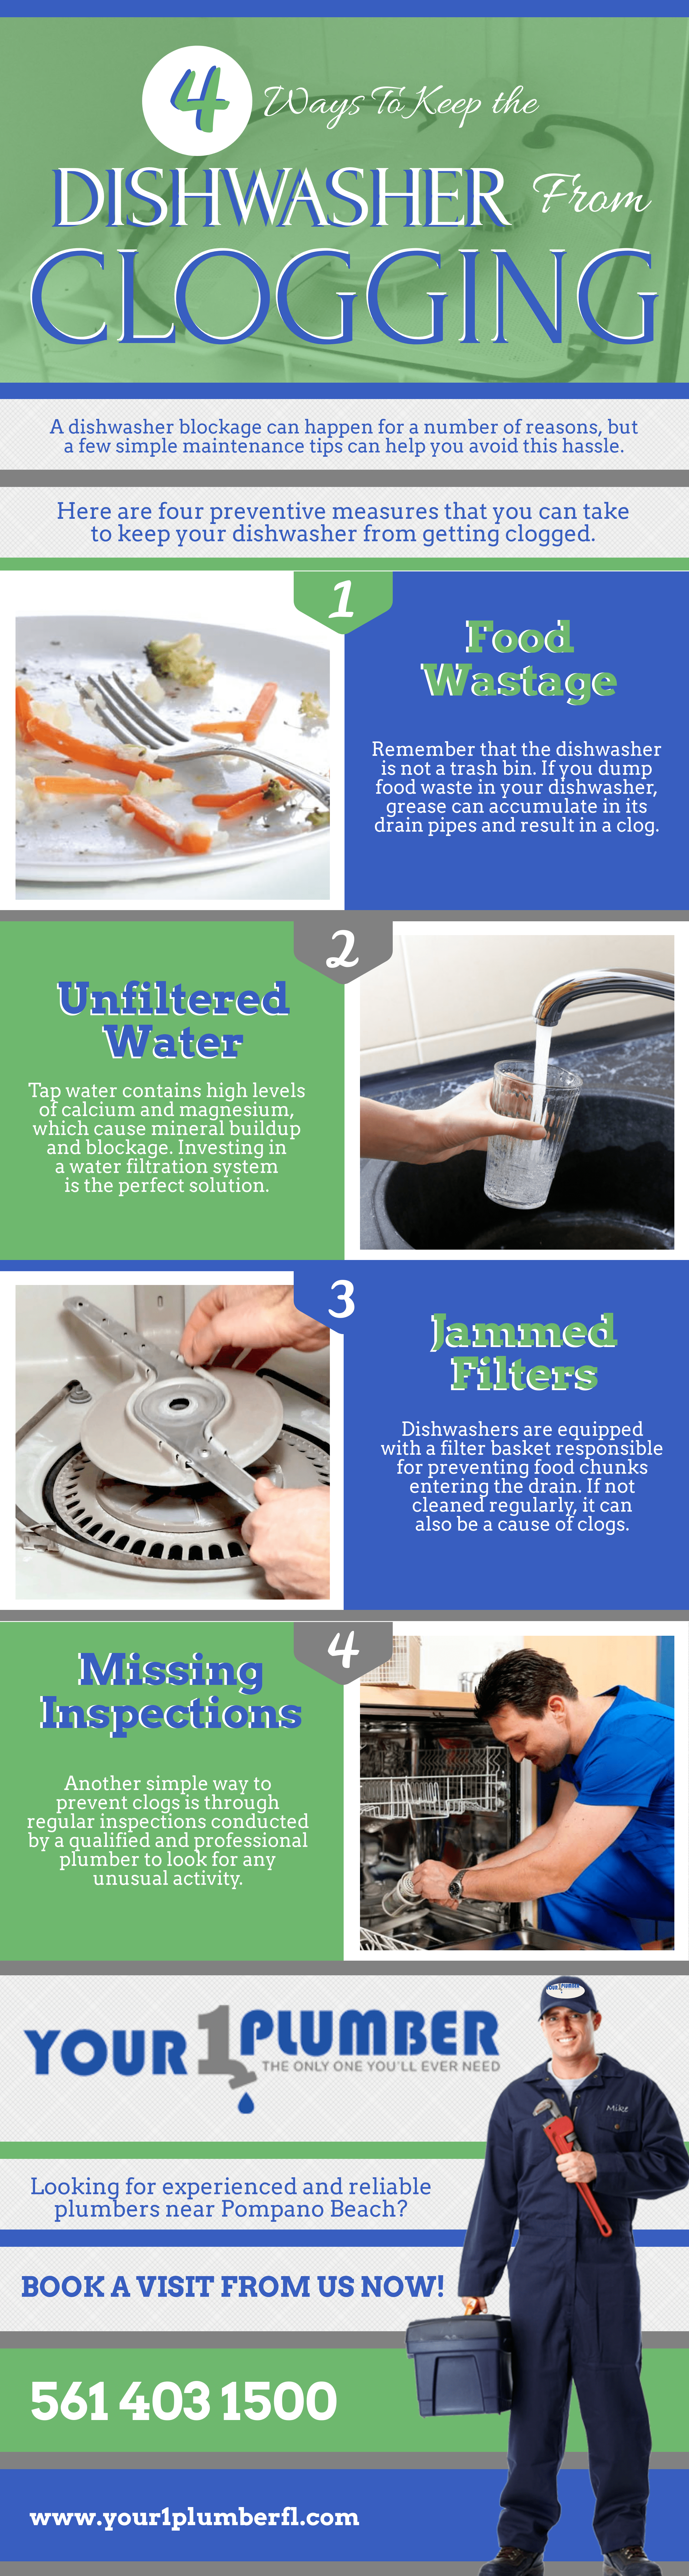 ways-to-keep-the-diswasher-form-clogging-min